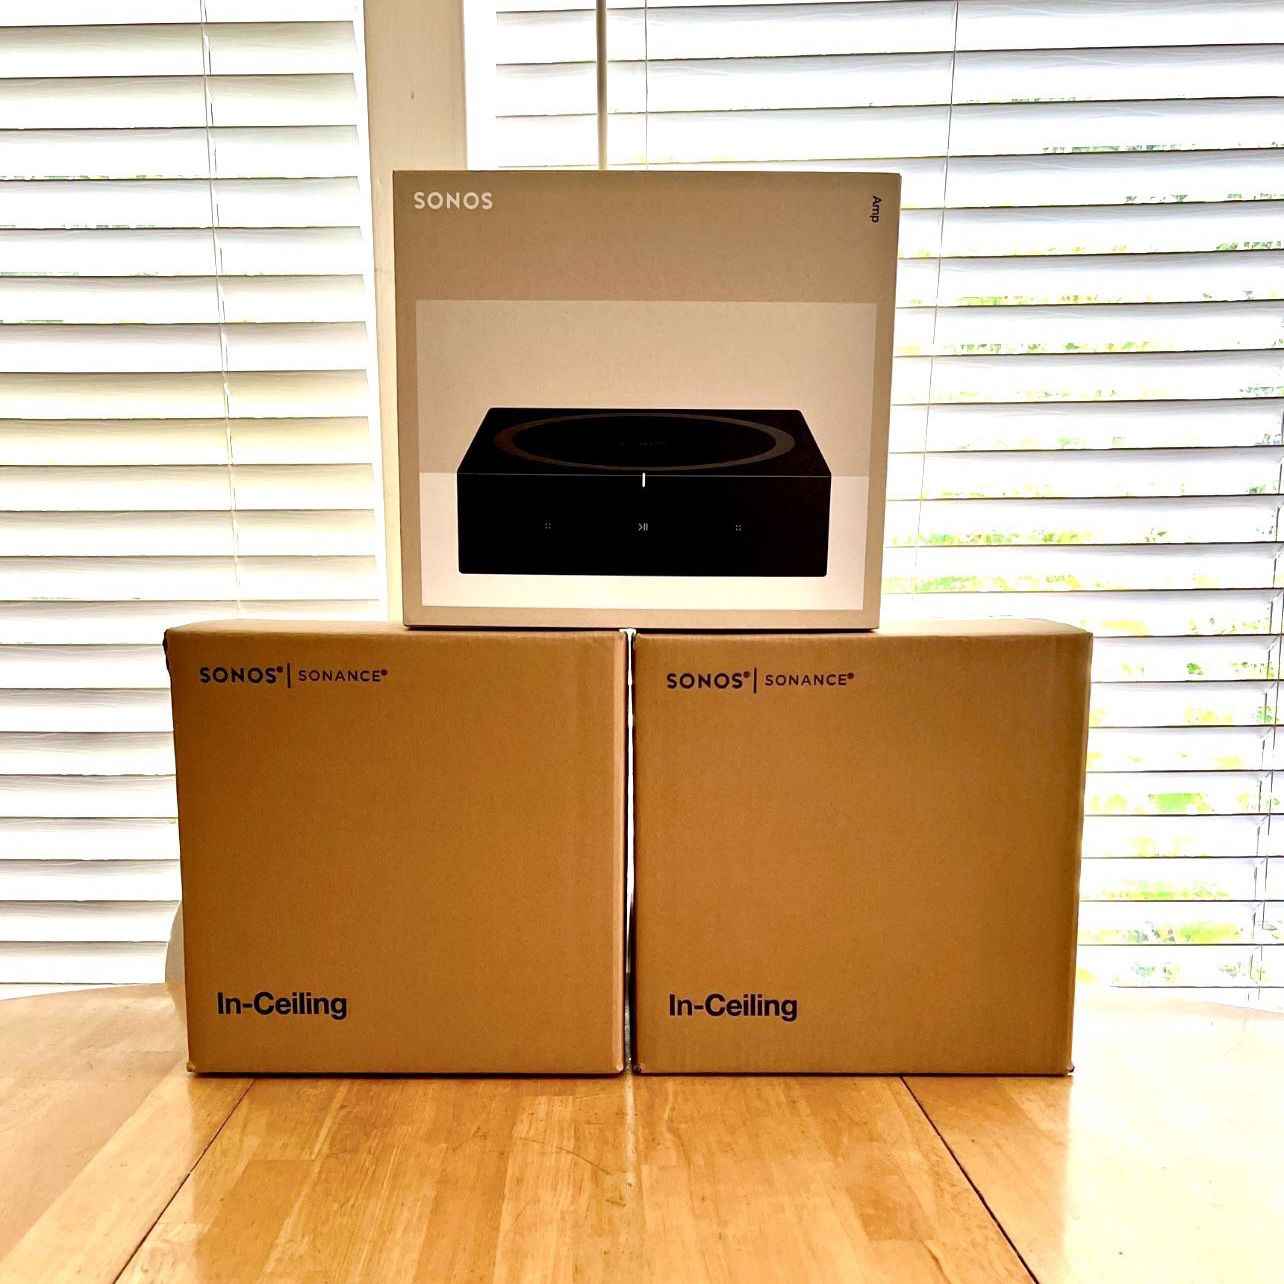 4 x Sonos Architecture In Ceiling Speakers Including The Latest Sonos Amp 250w, 2.1 Channel Amplifier.  Brand New. Includes Manufacture Warranty.